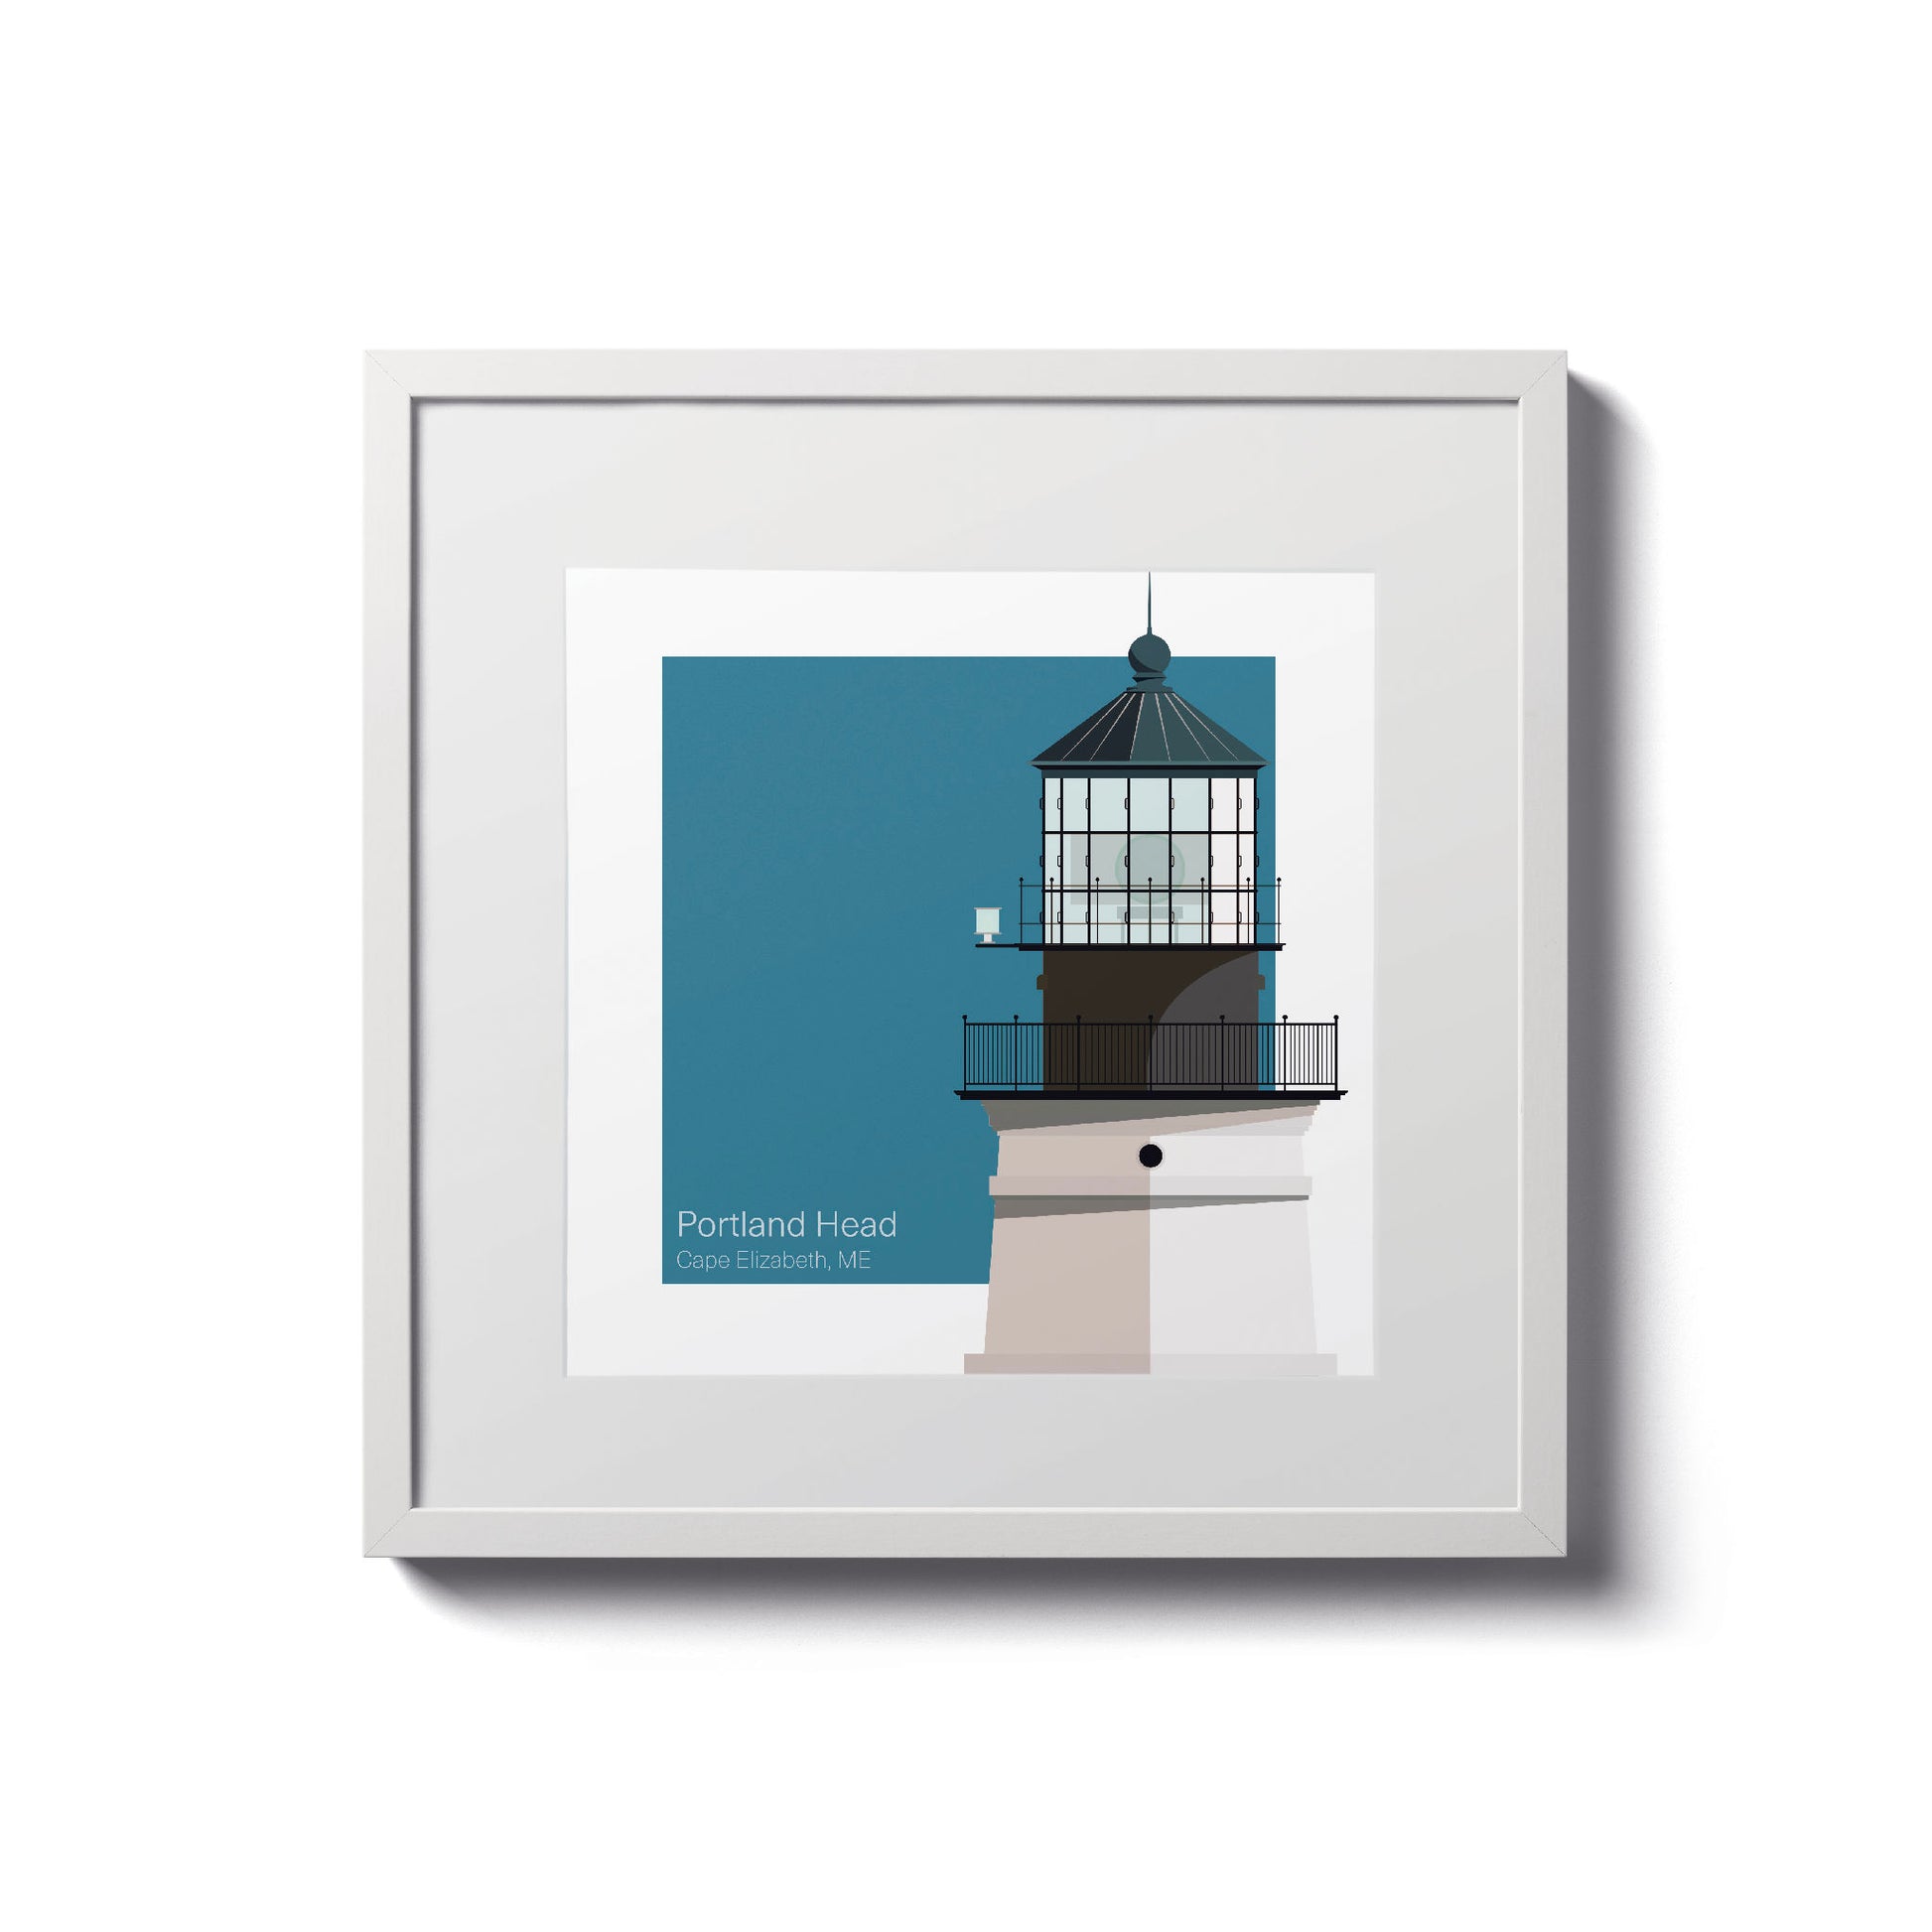 Illustration of the Portland Head lighthouse, ME, USA. On a white background with aqua blue square as a backdrop., in a white frame  and measuring 8"x8" (20x20cm).